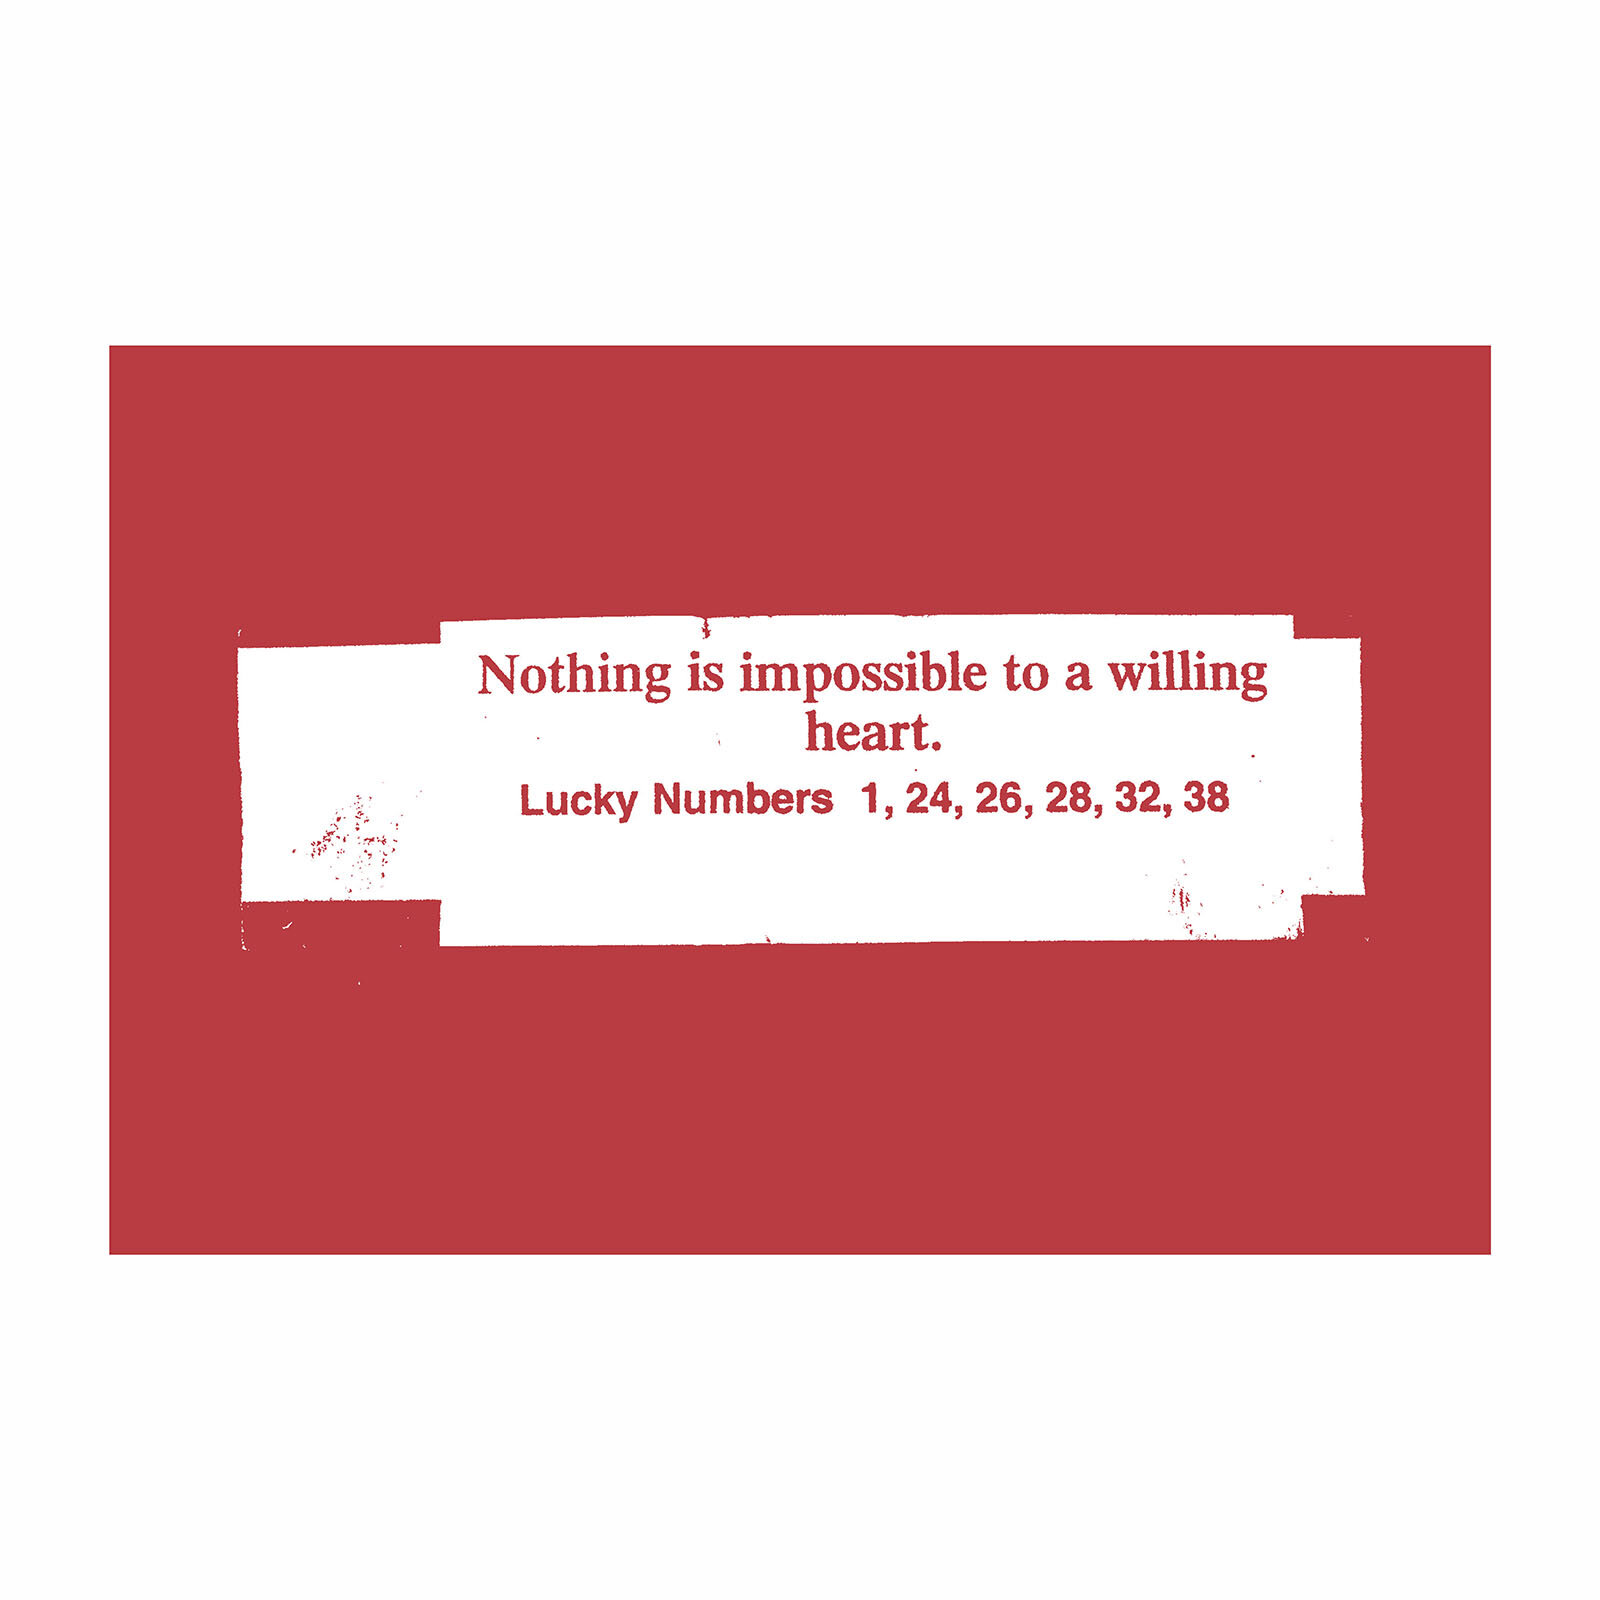 Ape_Bleakney_20YearsofFortunes_Wild Cherry 12.5x19 (Nothing is impossible...).jpg